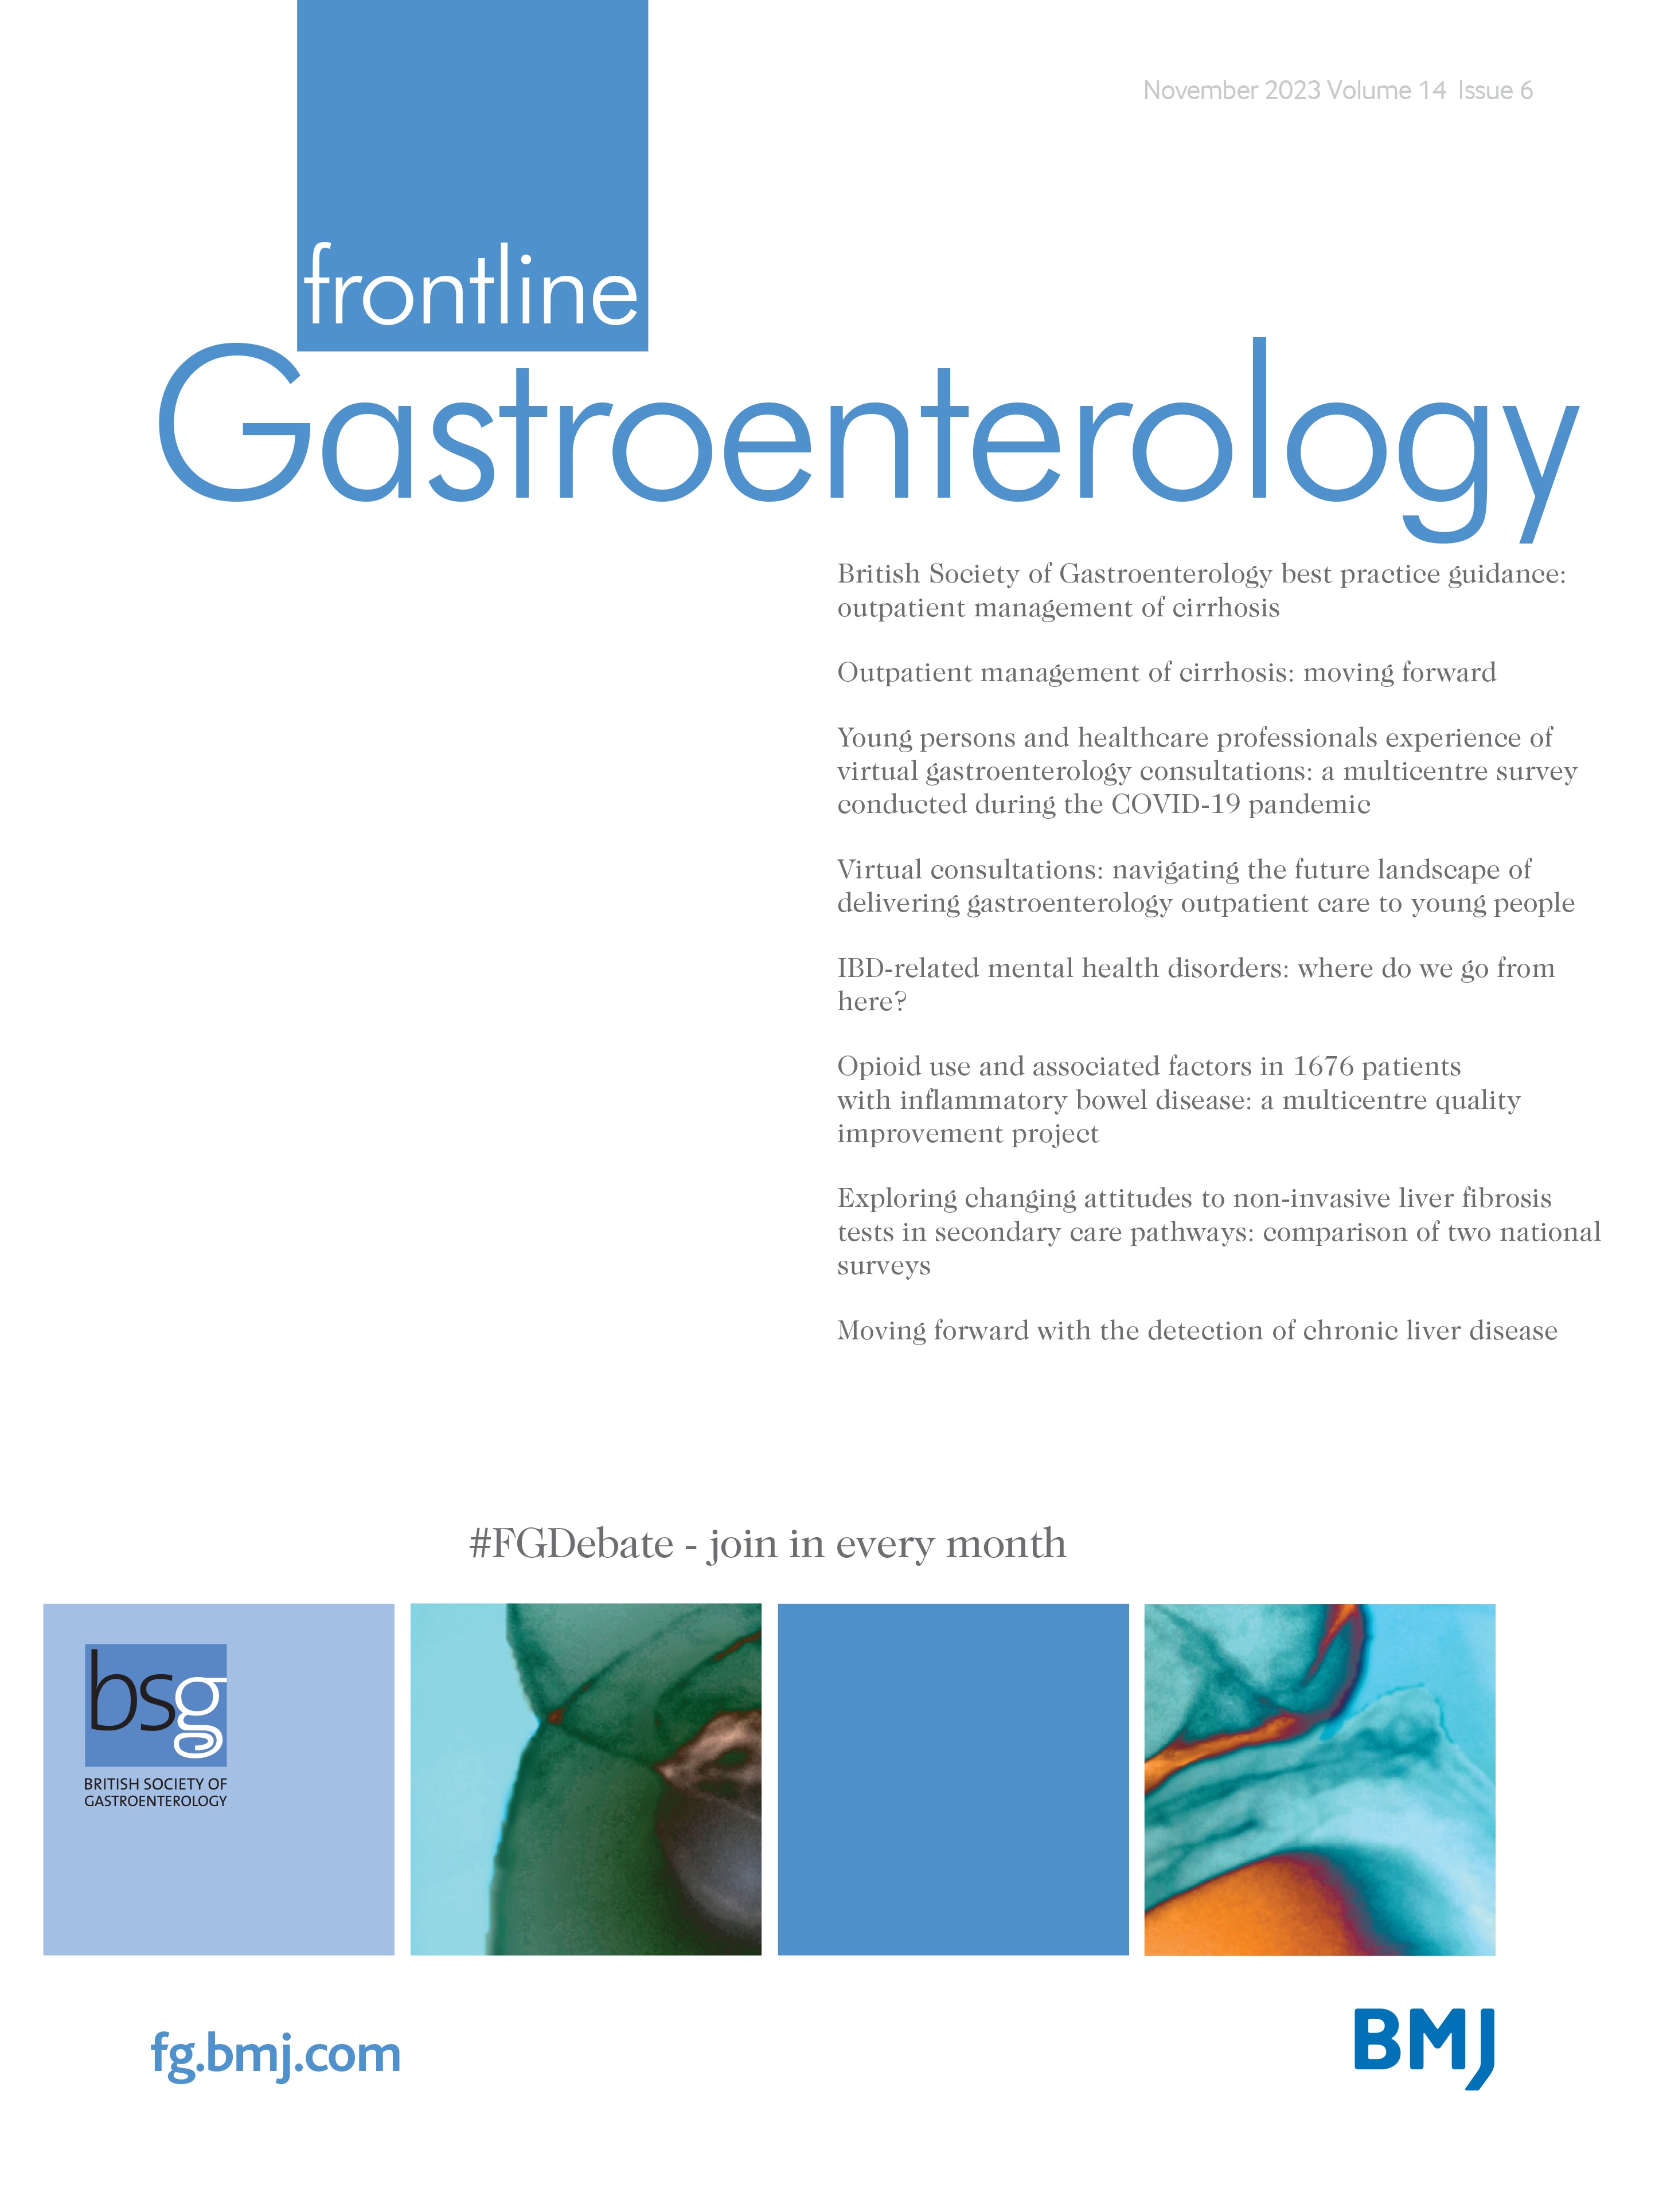 Bacterial contamination of endoscopist and assistant face visors during gastrointestinal endoscopy: a pilot study